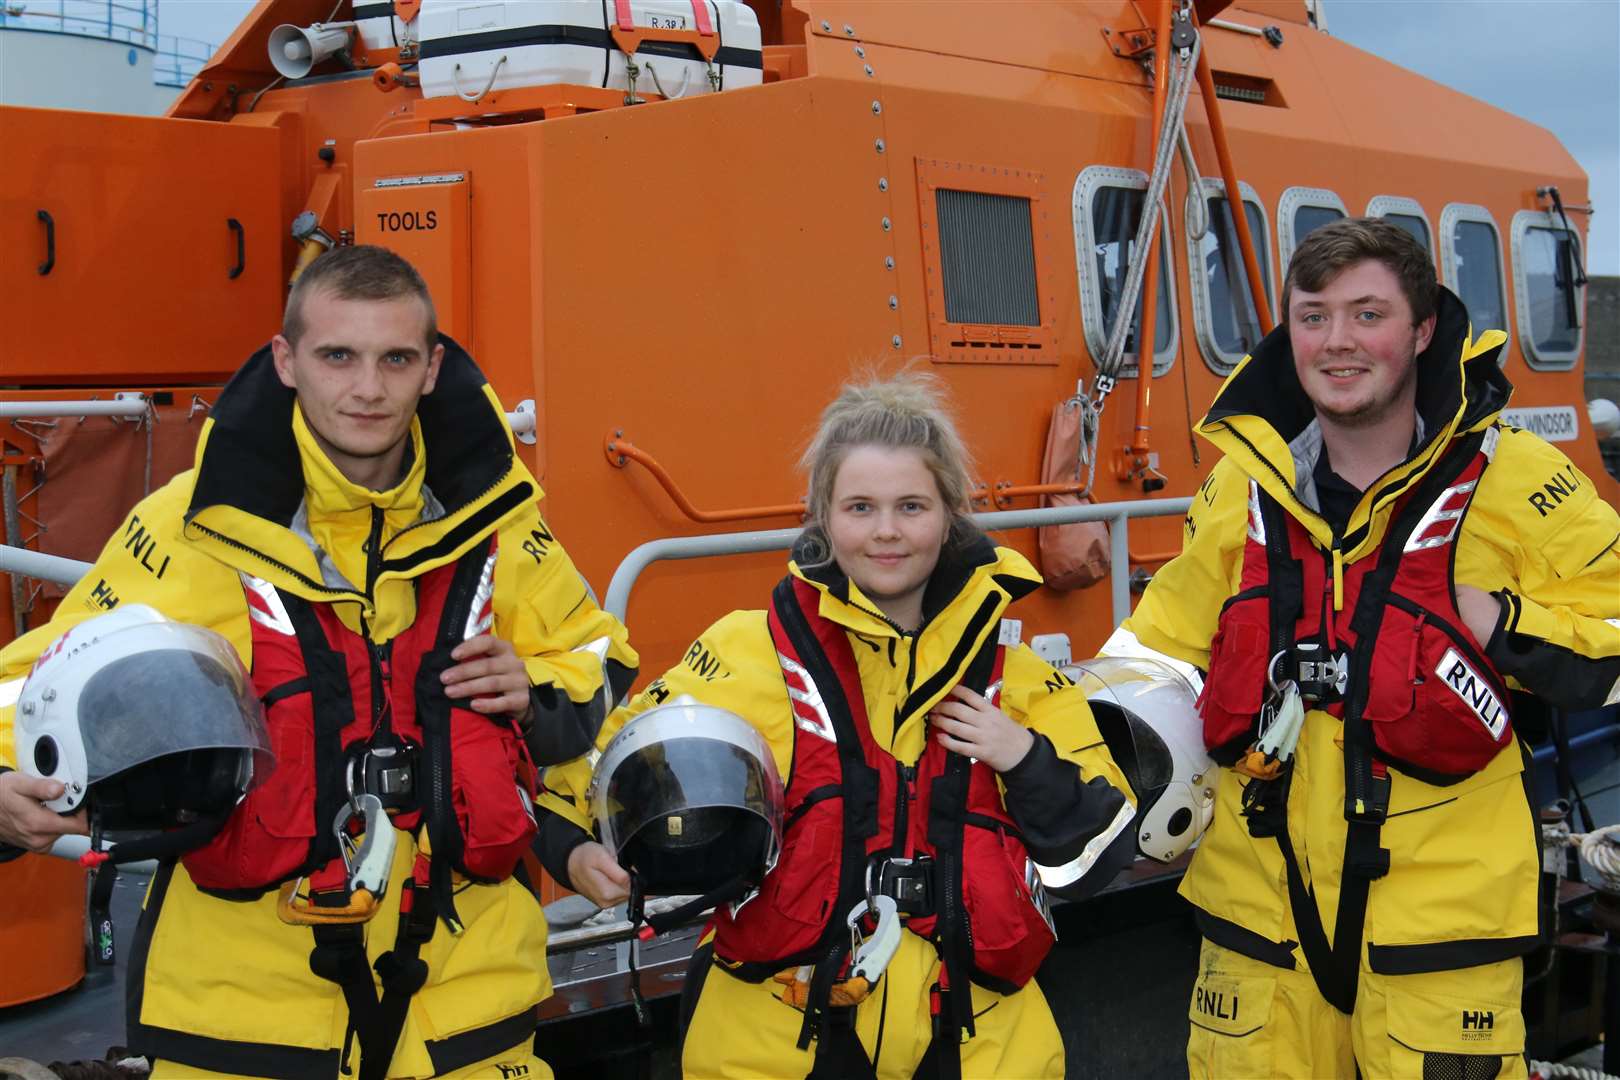 The three Wick lifeboat recruits who have completed their Crew Emergency Procedures training at Poole in Dorset – (from left) Martin Gibson, Zoe Rothera and Elliot Geddes.